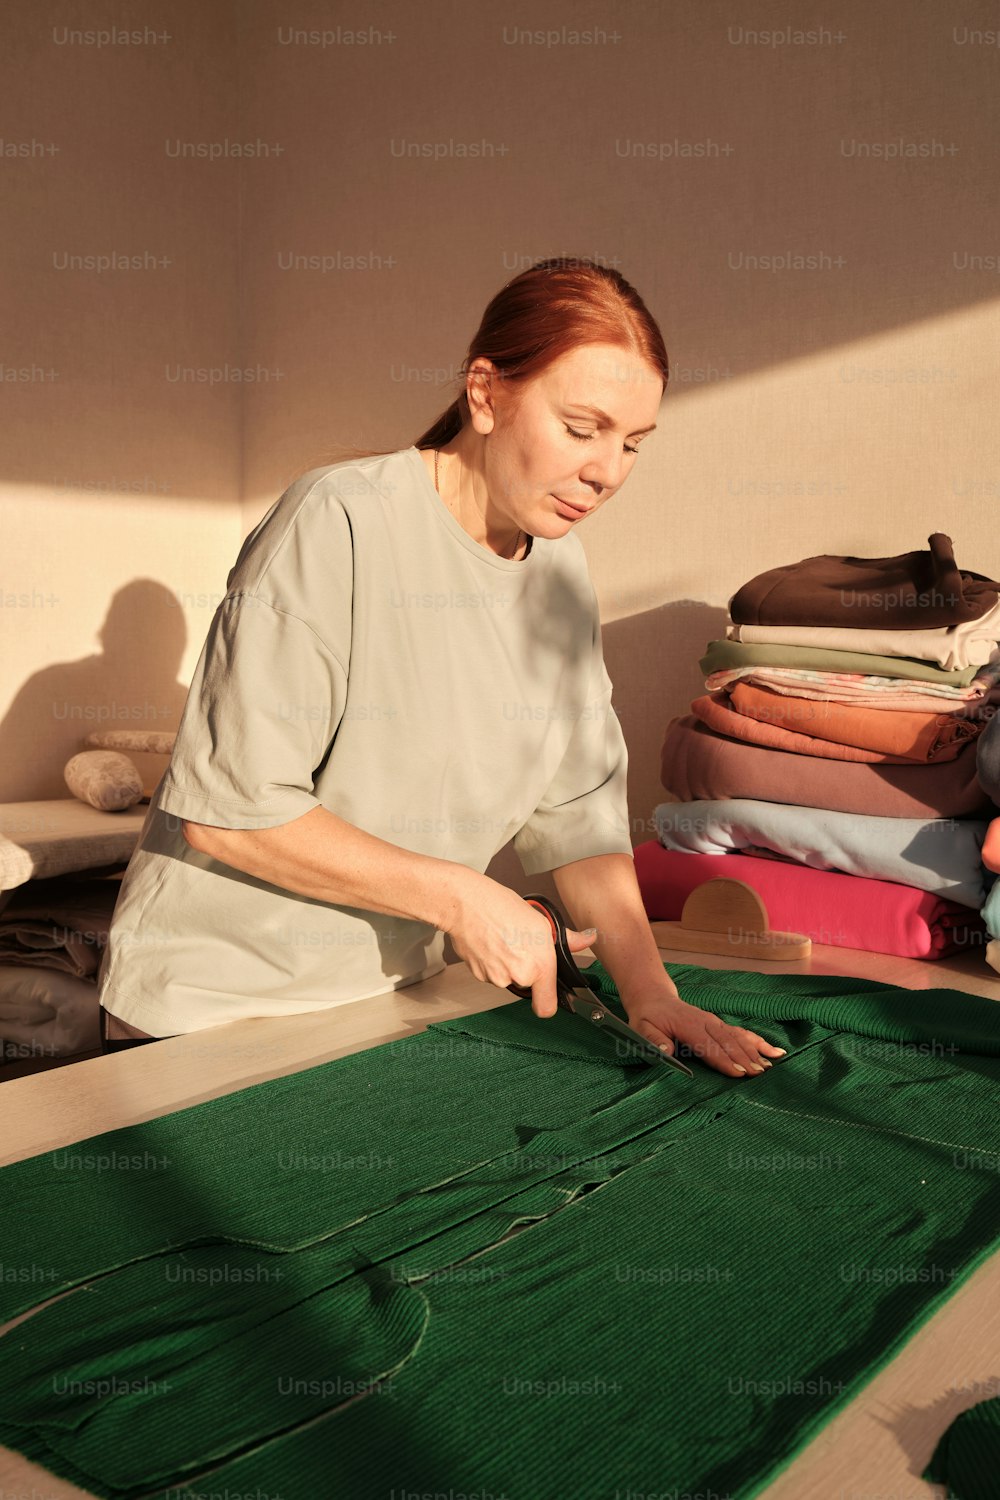 a woman is working on a green piece of cloth